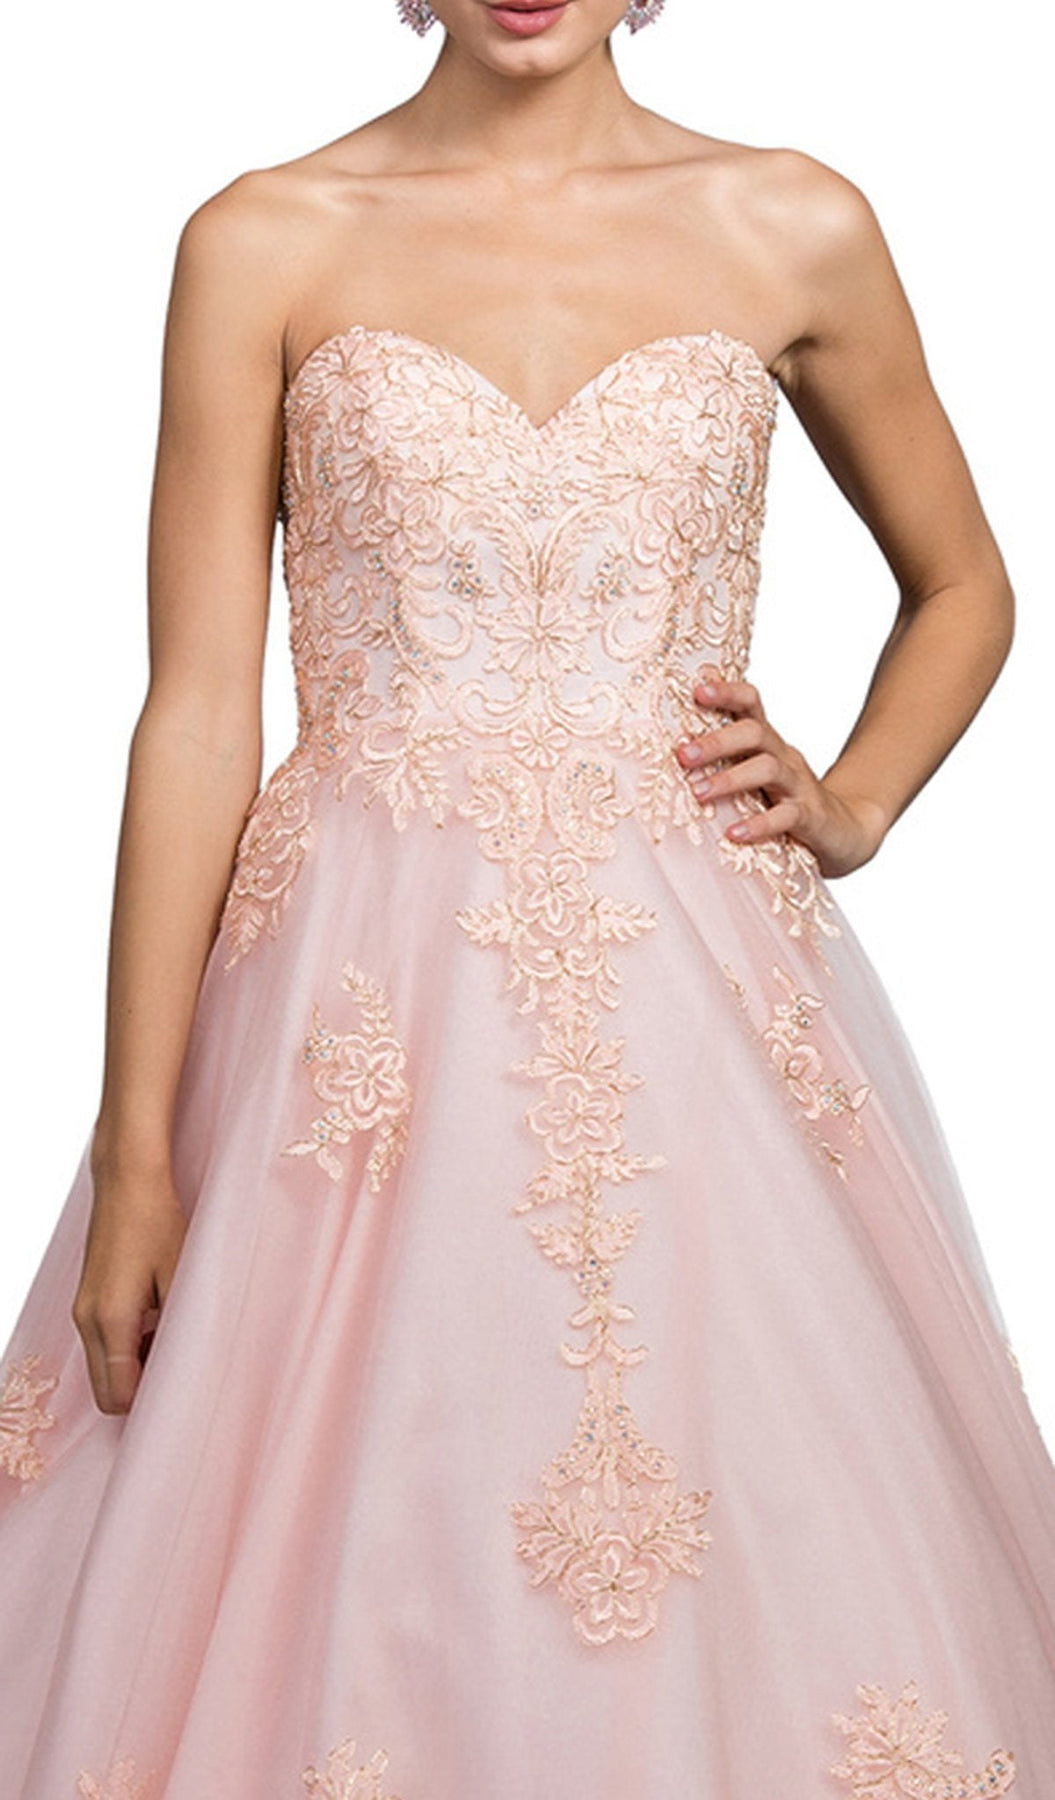 Dancing Queen - 1204 Strapless Embellished Sweetheart Prom Ballgown Special Occasion Dress S / Blush